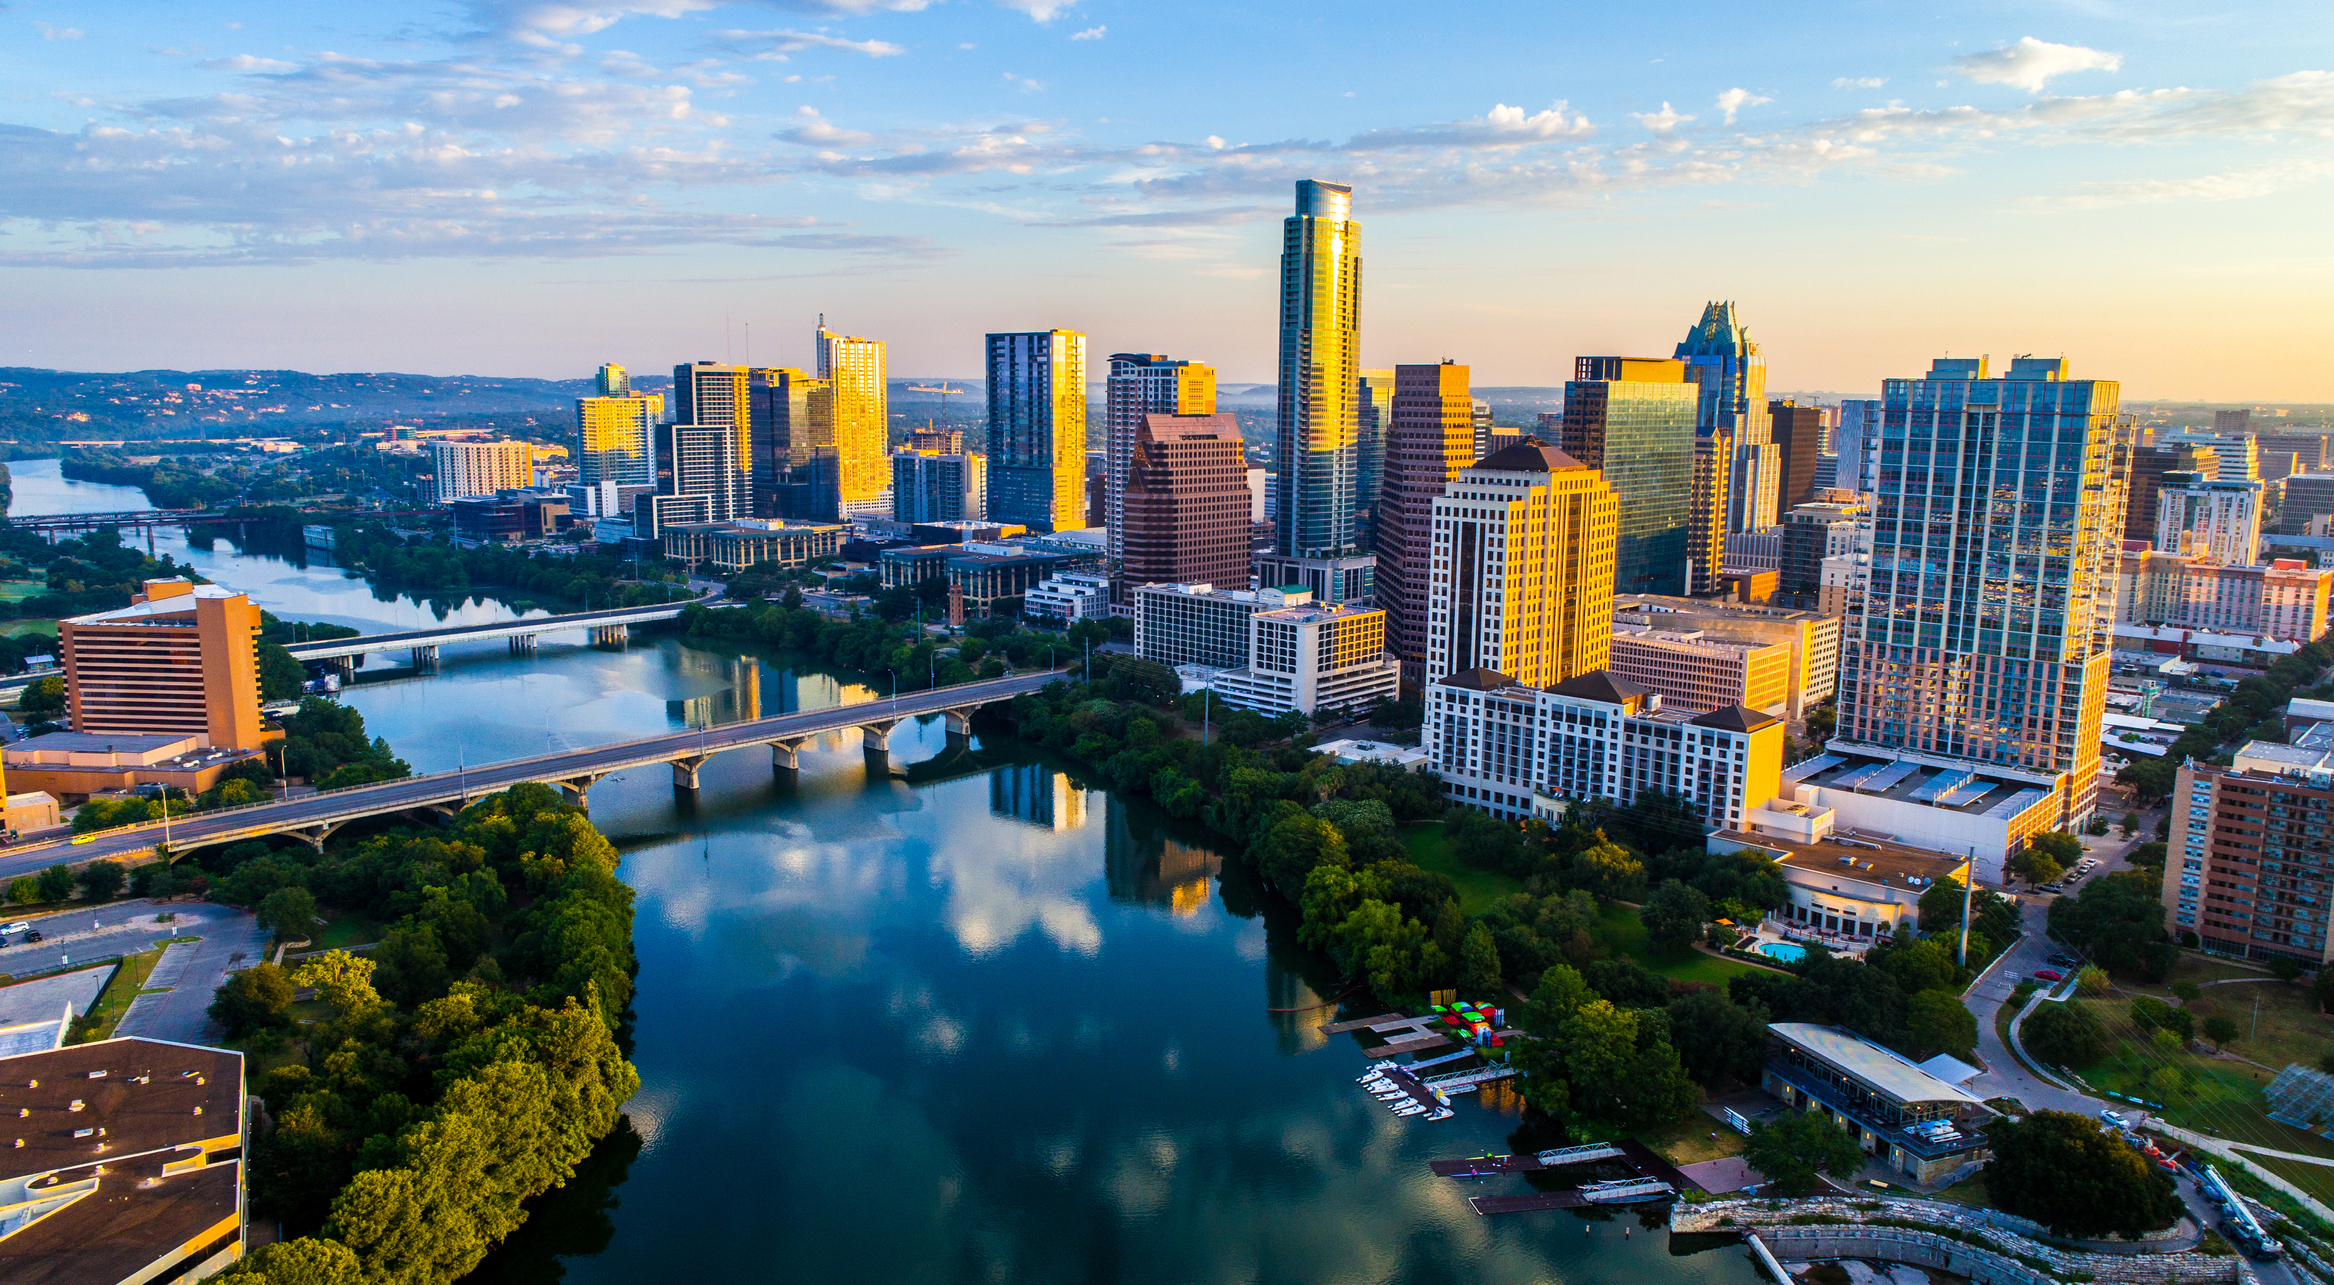 online contests, sweepstakes and giveaways - Win a VIP Trip to Austin, TX